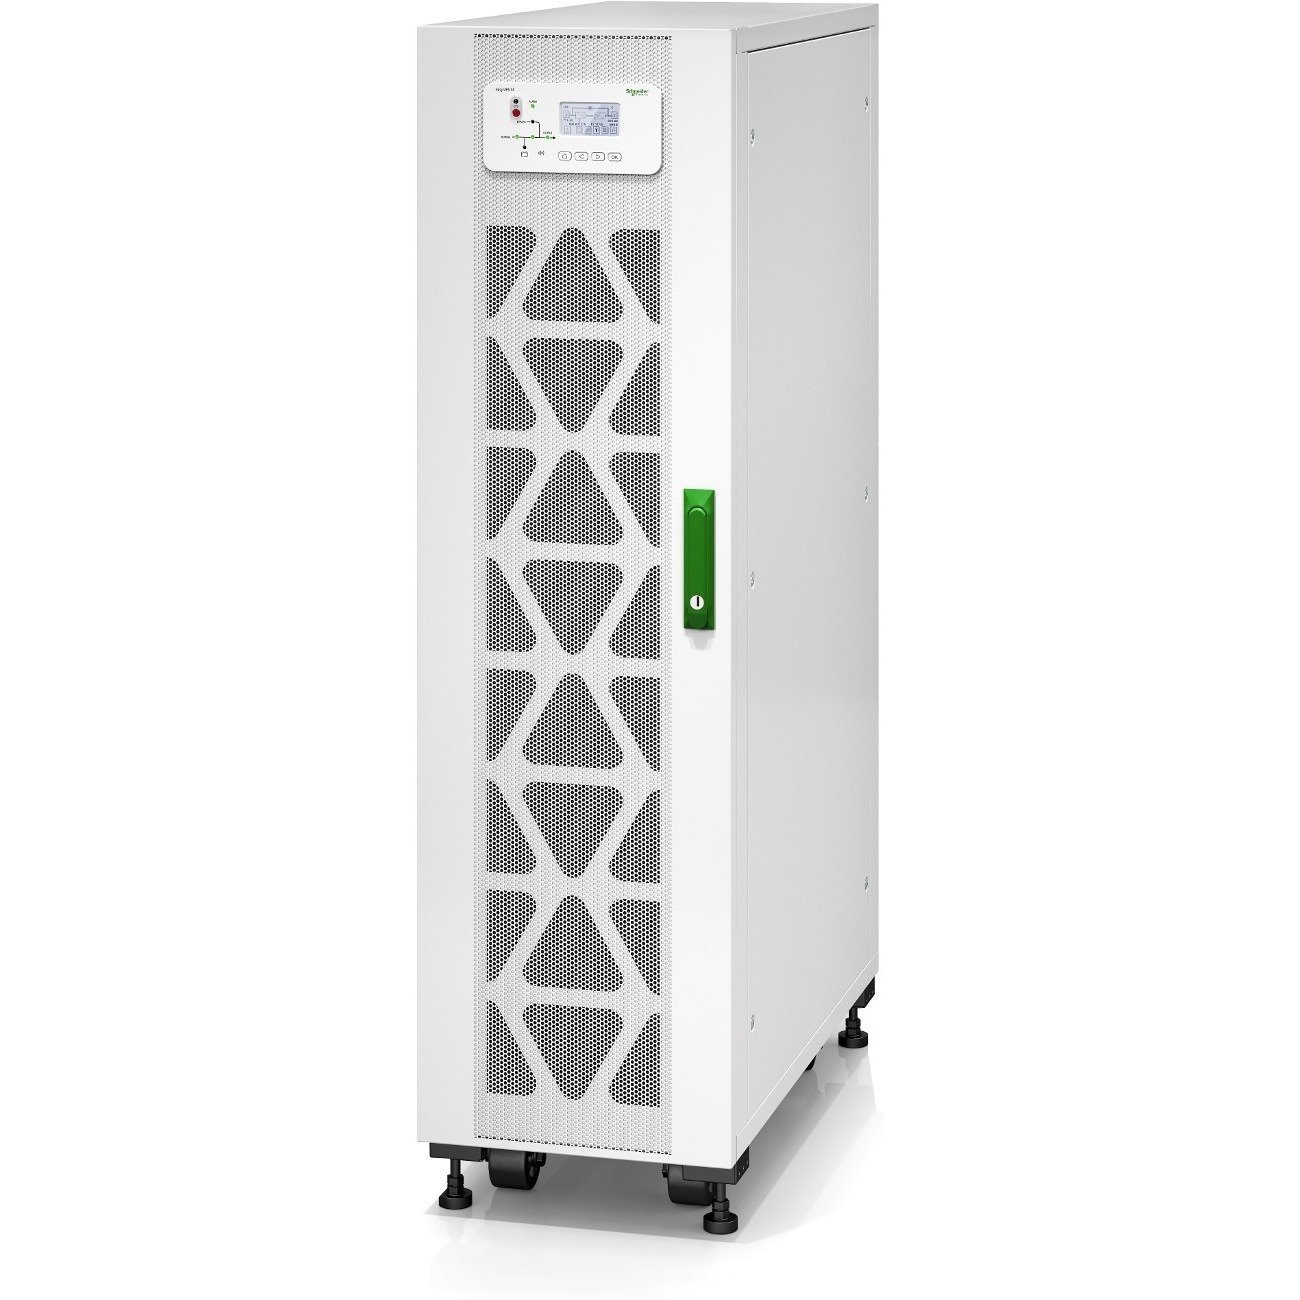 Schneider Electric Easy UPS 3S 20KVA Tower UPS